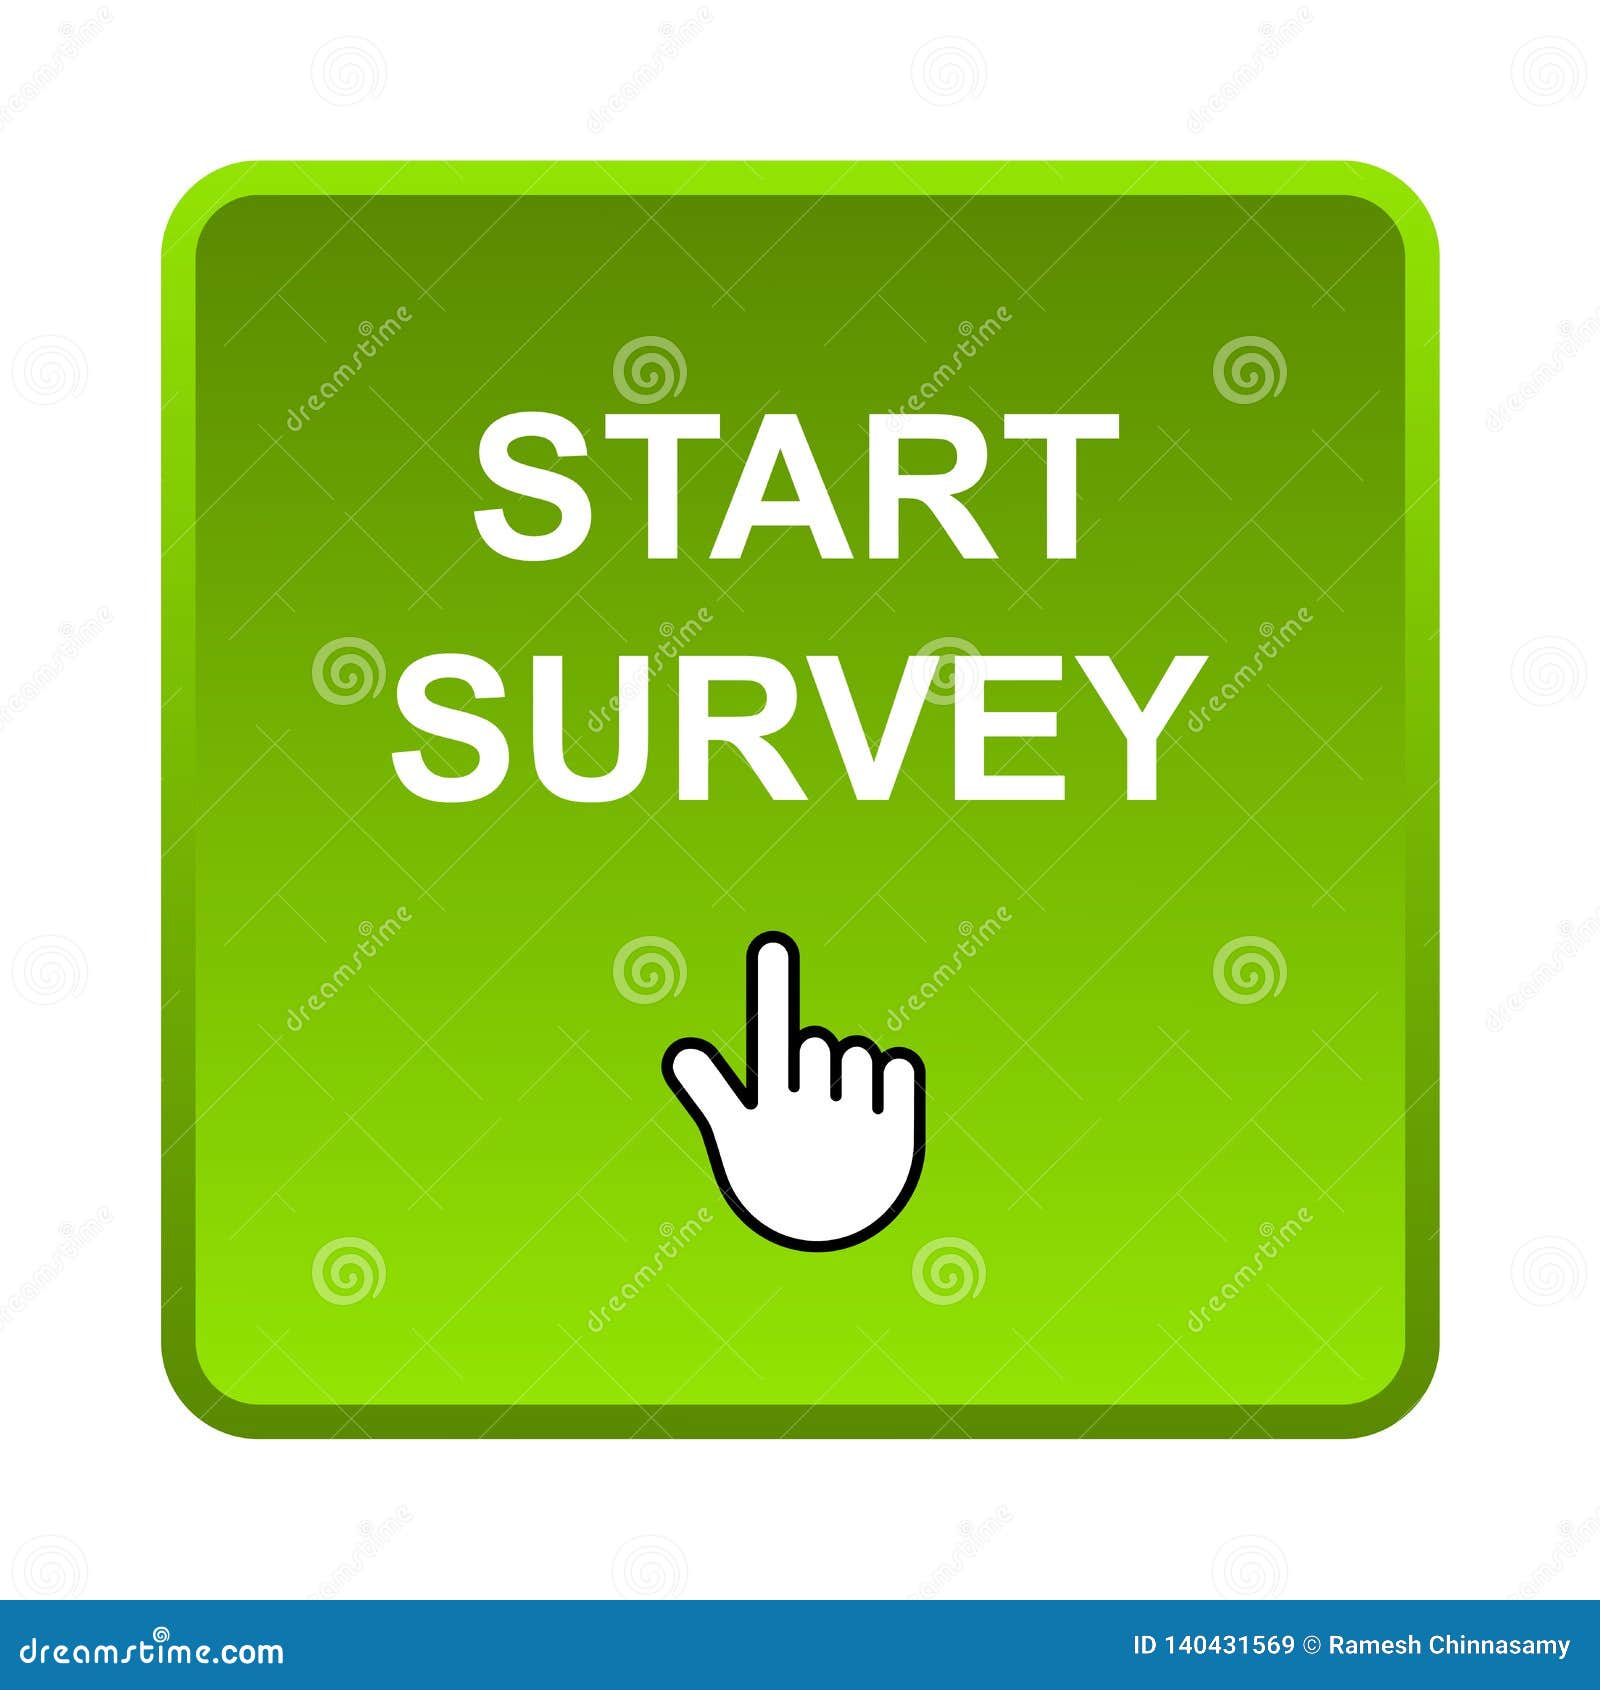 survey-button-start-survey-button-editable-vector-illustration-isolated-white-background-124317941  - Stow Fitness Center